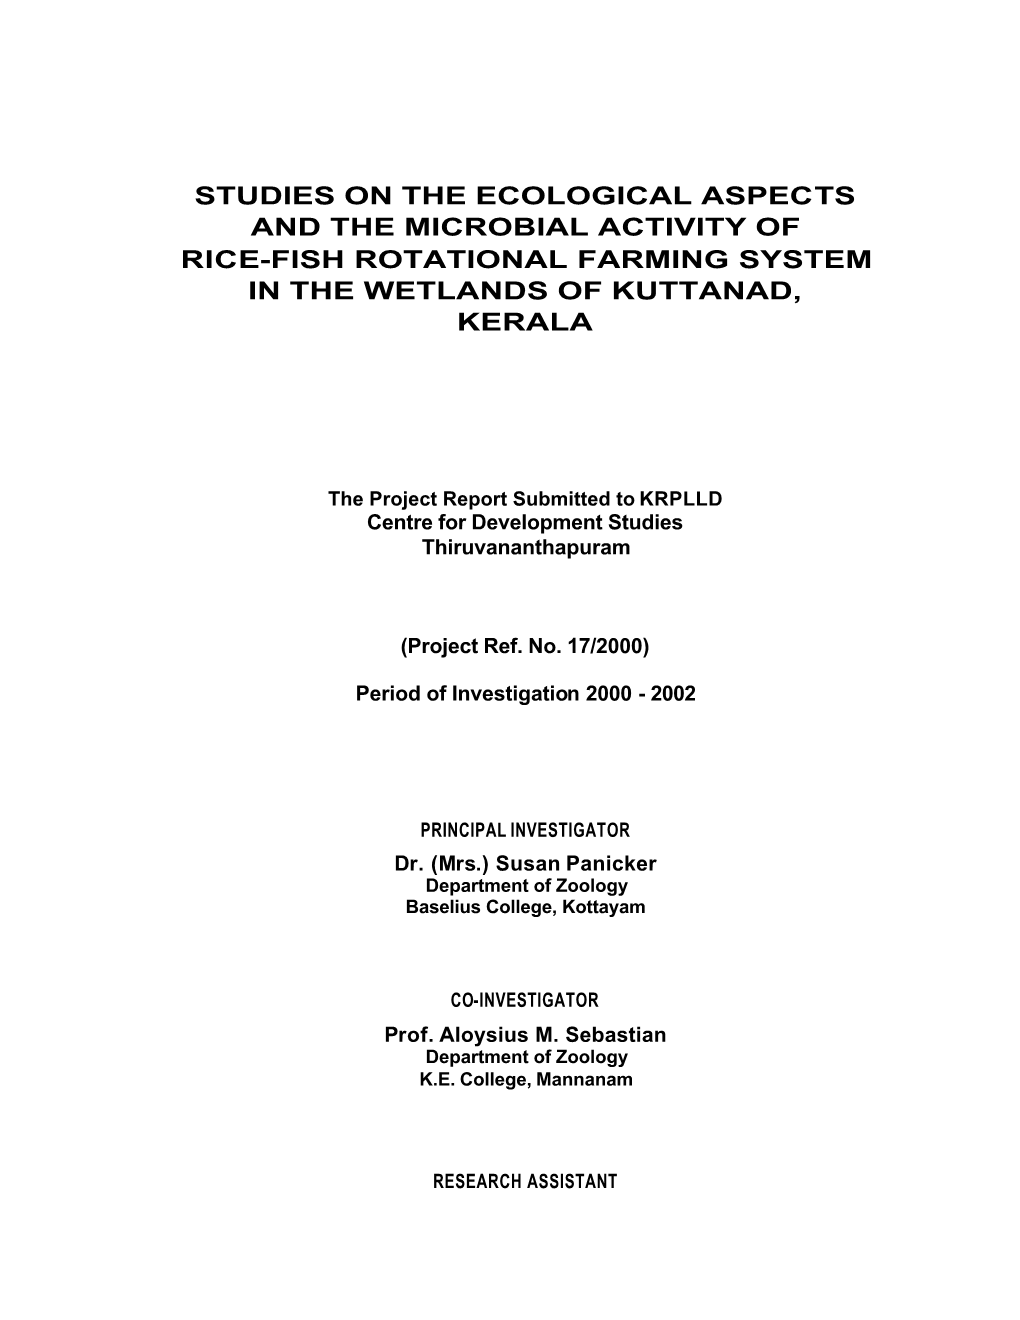 Studies on the Ecological Aspects and the Microbial Activity of Rice-Fish Rotational Farming System in the Wetlands of Kuttanad, Kerala